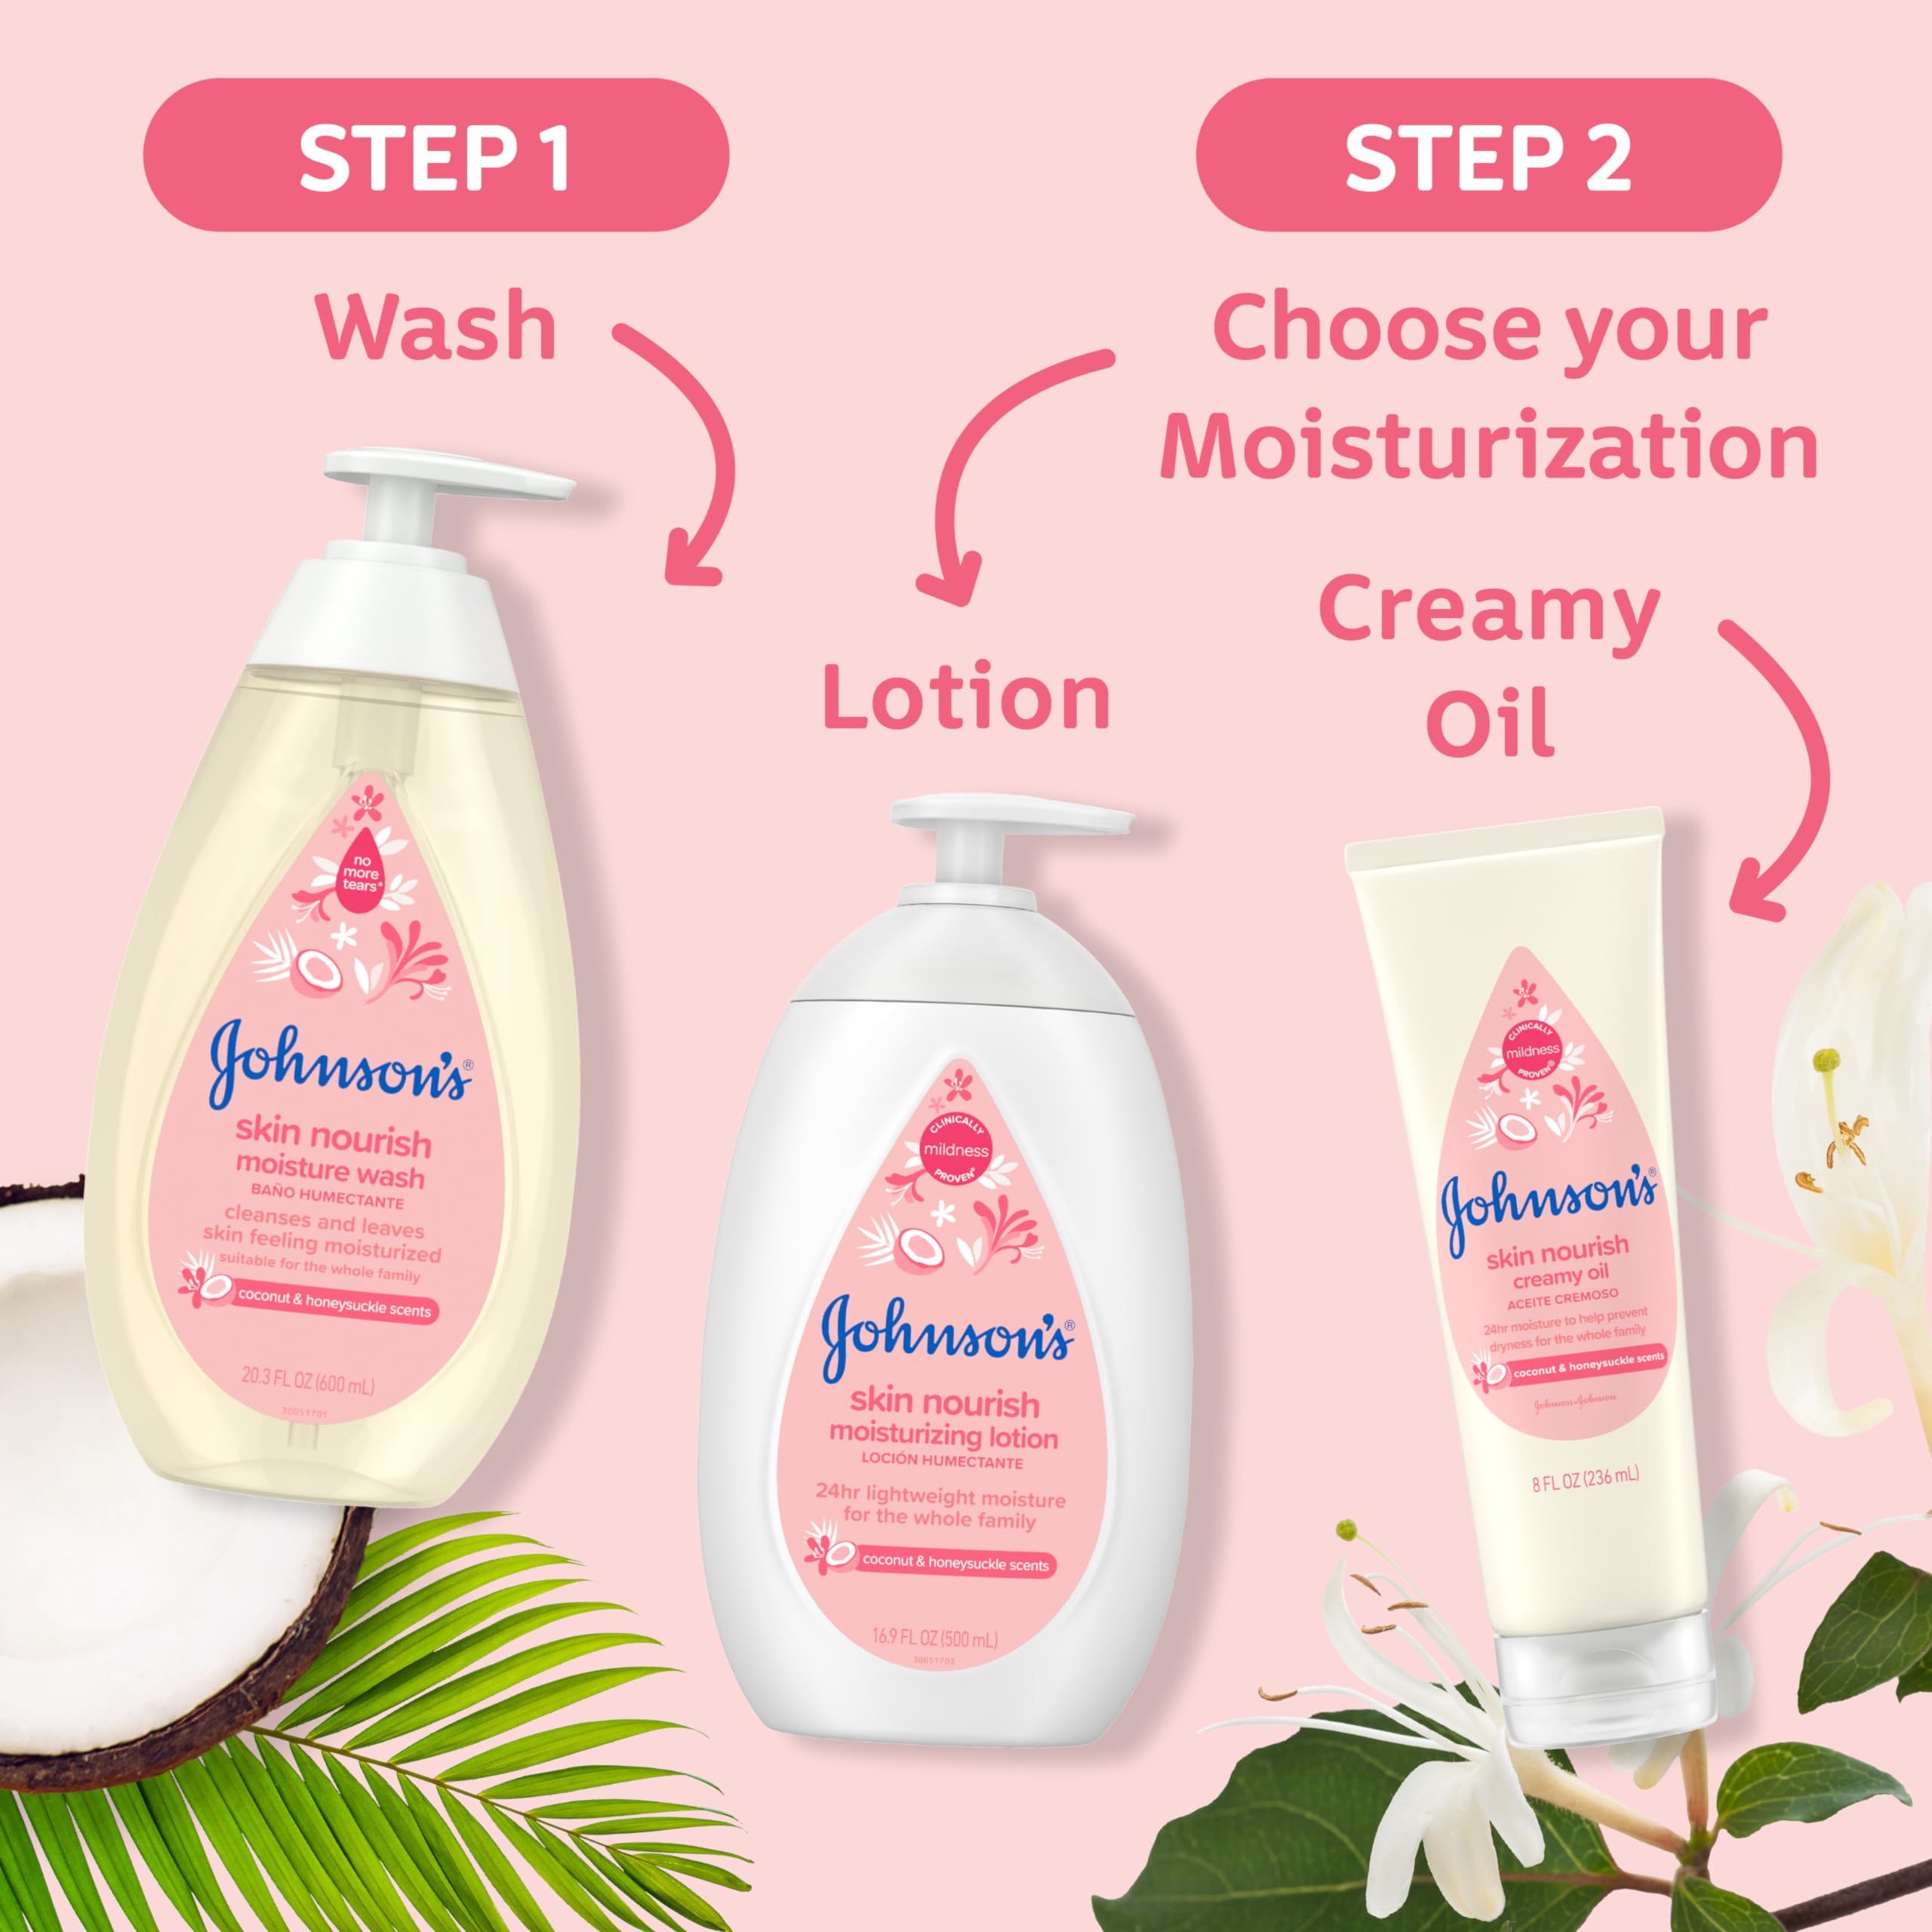 Johnson's Skin Nourish Creamy Baby Oil for Dry Skin with Coconut & Honeysuckle Scent, Rich & Creamy Baby Body Oil Moisturizes for 24 Hours & Helps Prevent Dryness, Hypoallergenic, 8 fl. Oz